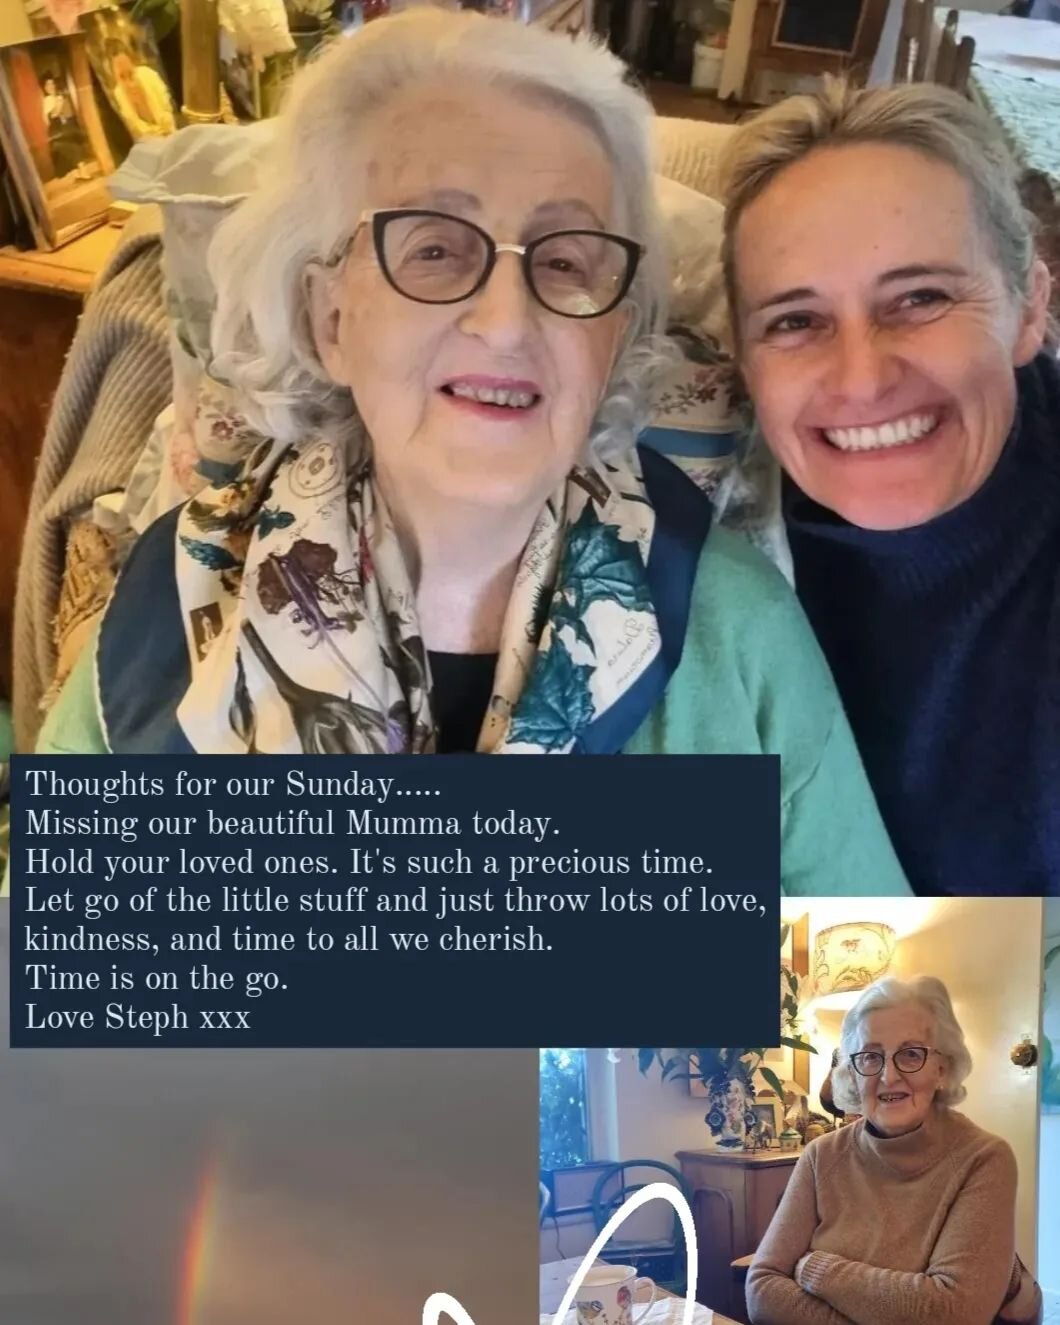 Thoughts for our Sunday.....
Missing our beautiful Mumma today.
Hold your loved ones. It's such a precious time. 
Let go of the little stuff and just throw lots of love, kindness, and time to all we cherish.
Time is on the go.
Love Steph xxx
.
#steph